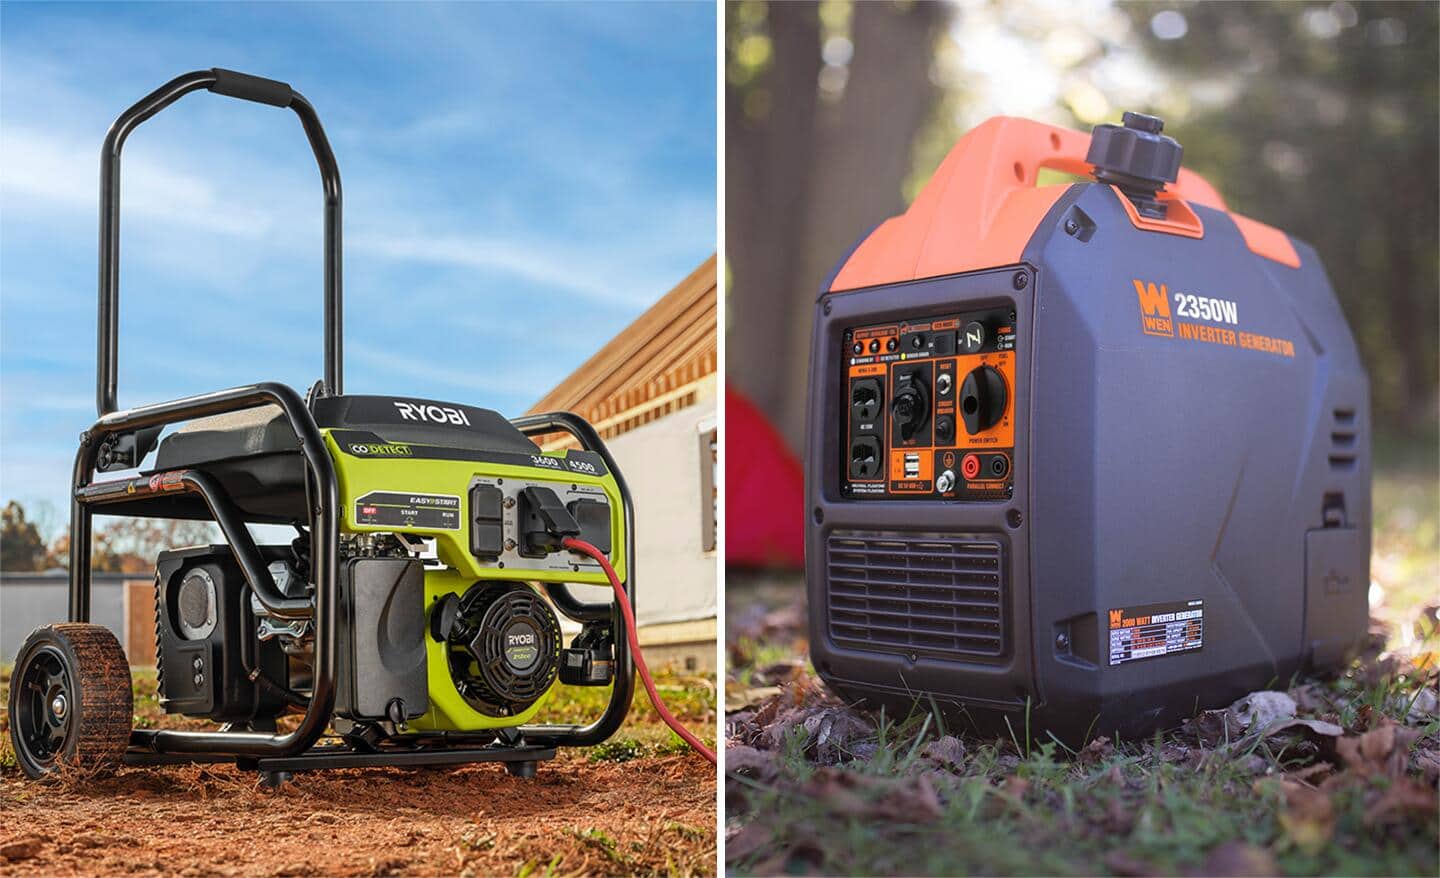 A split image with a portable generator on the left and an inverter generator on the right.